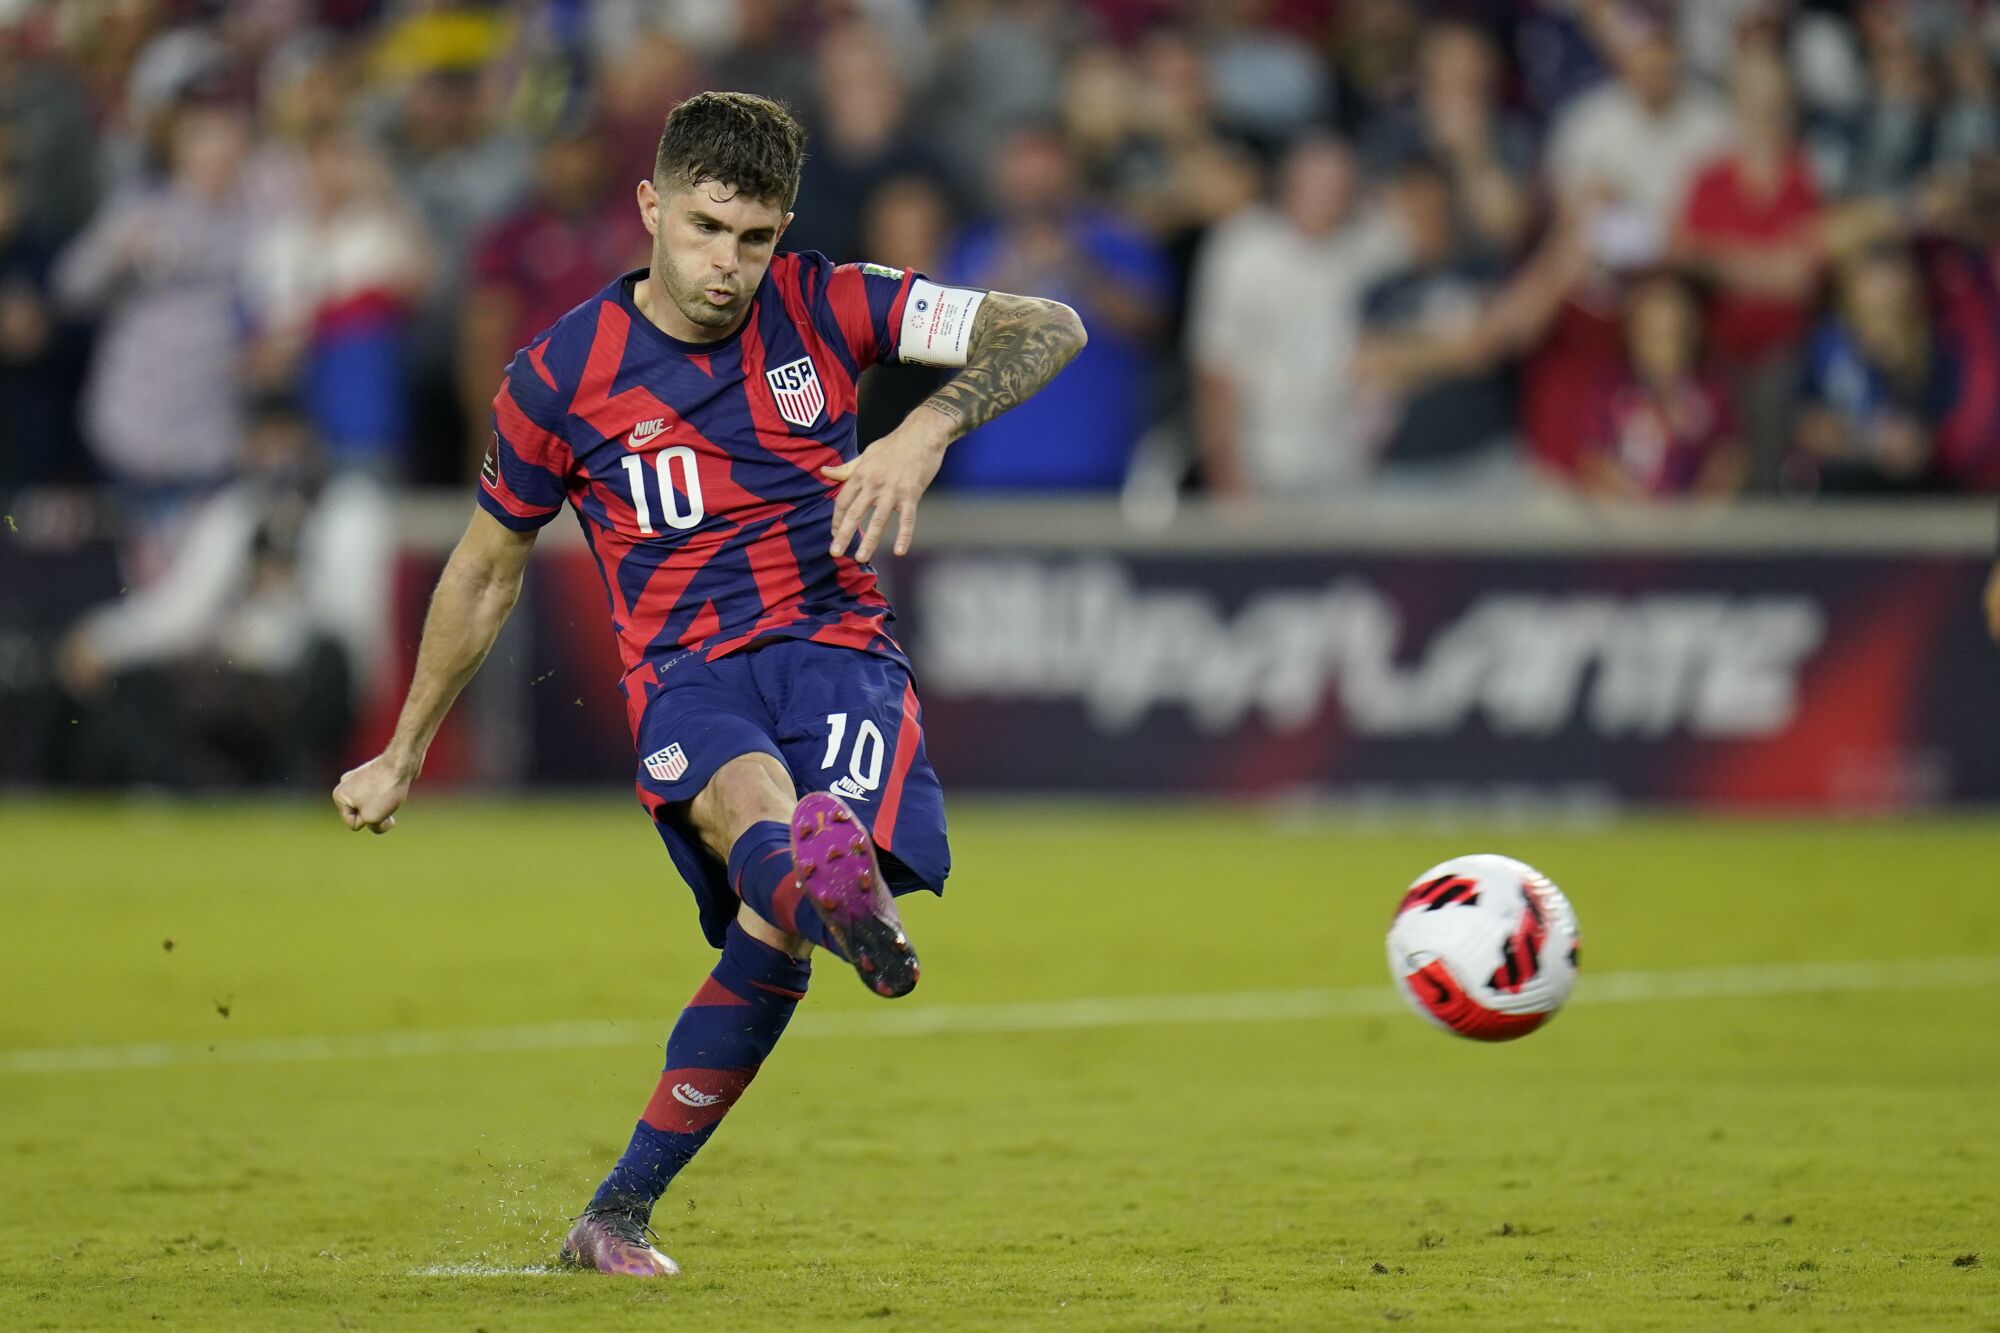 Christian Pulisic scores a goal on a penalty kick during a World Cup qualifier against Panama in March.